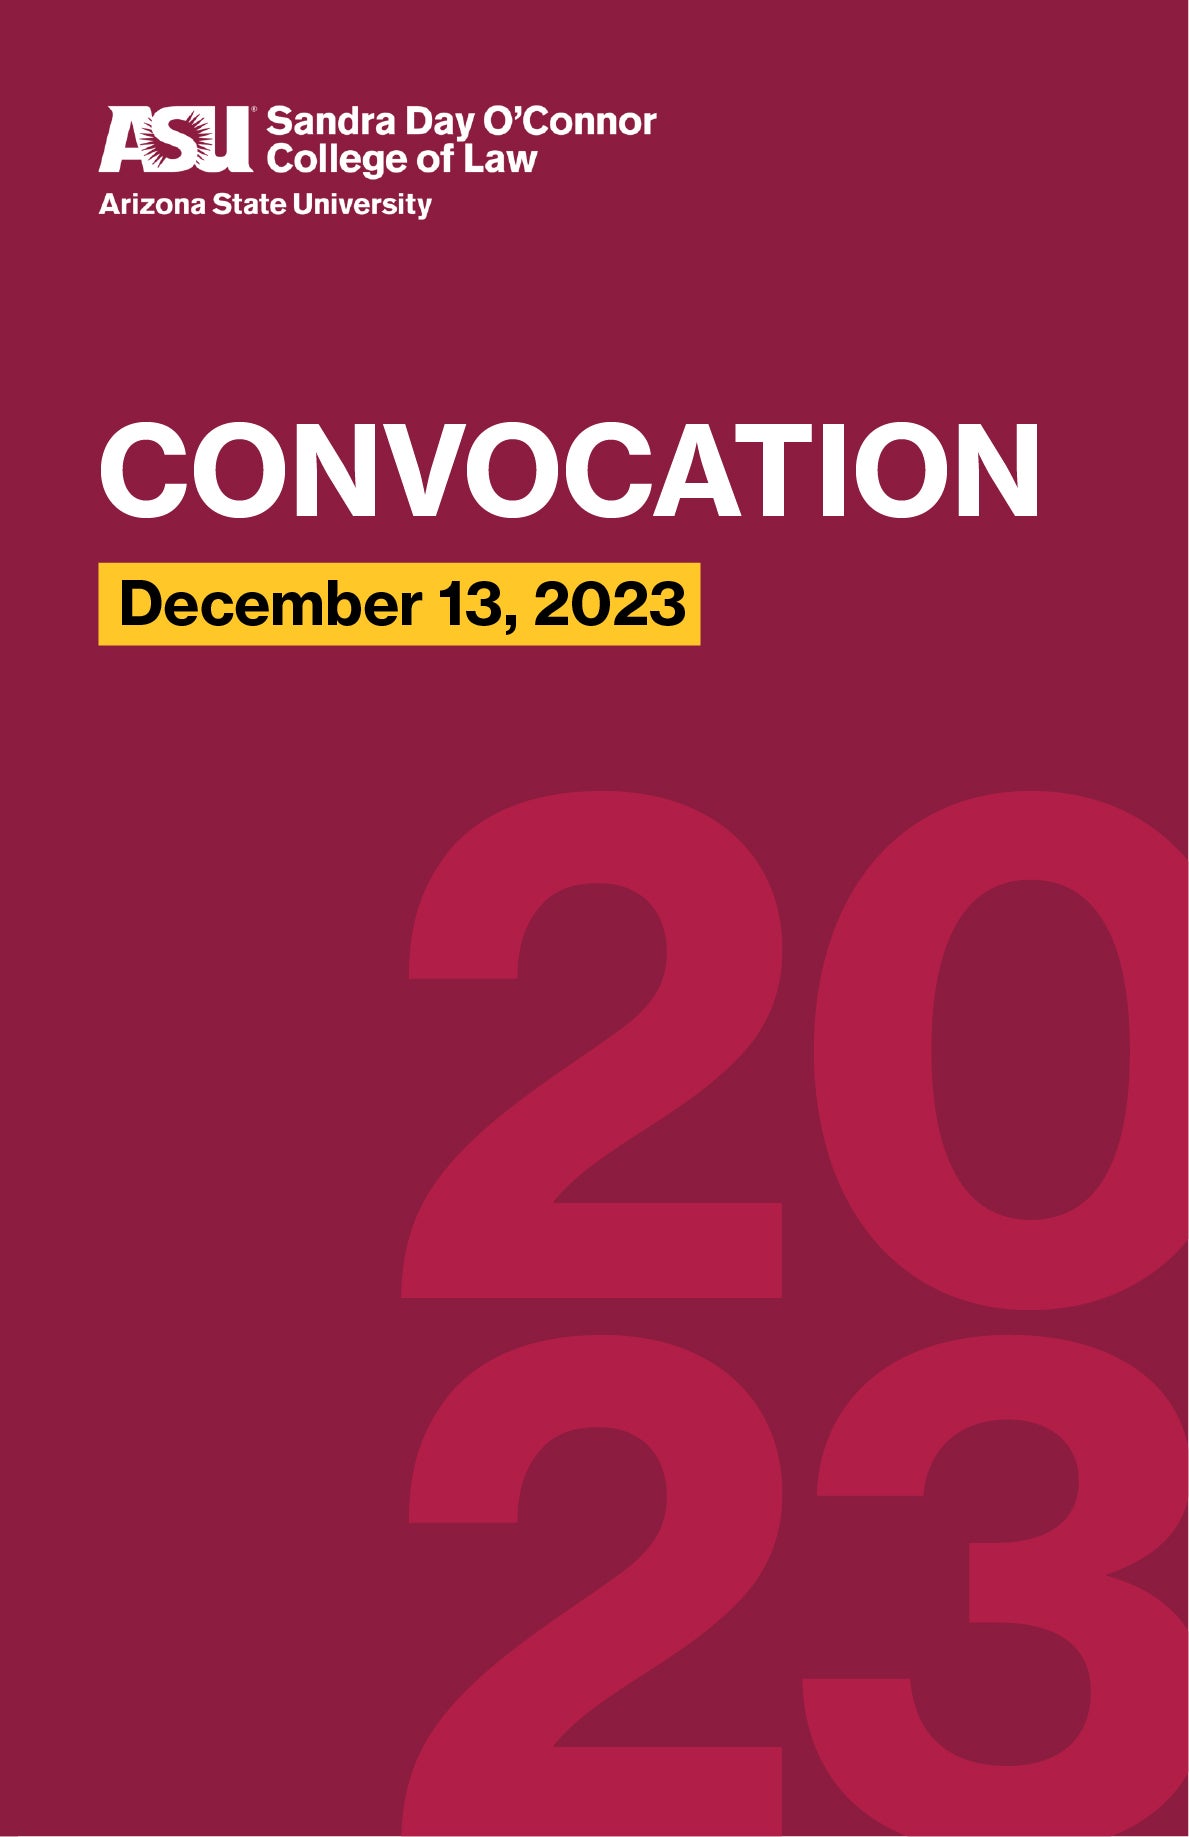 Convocation program from Fall ceremony on December 13, 2023